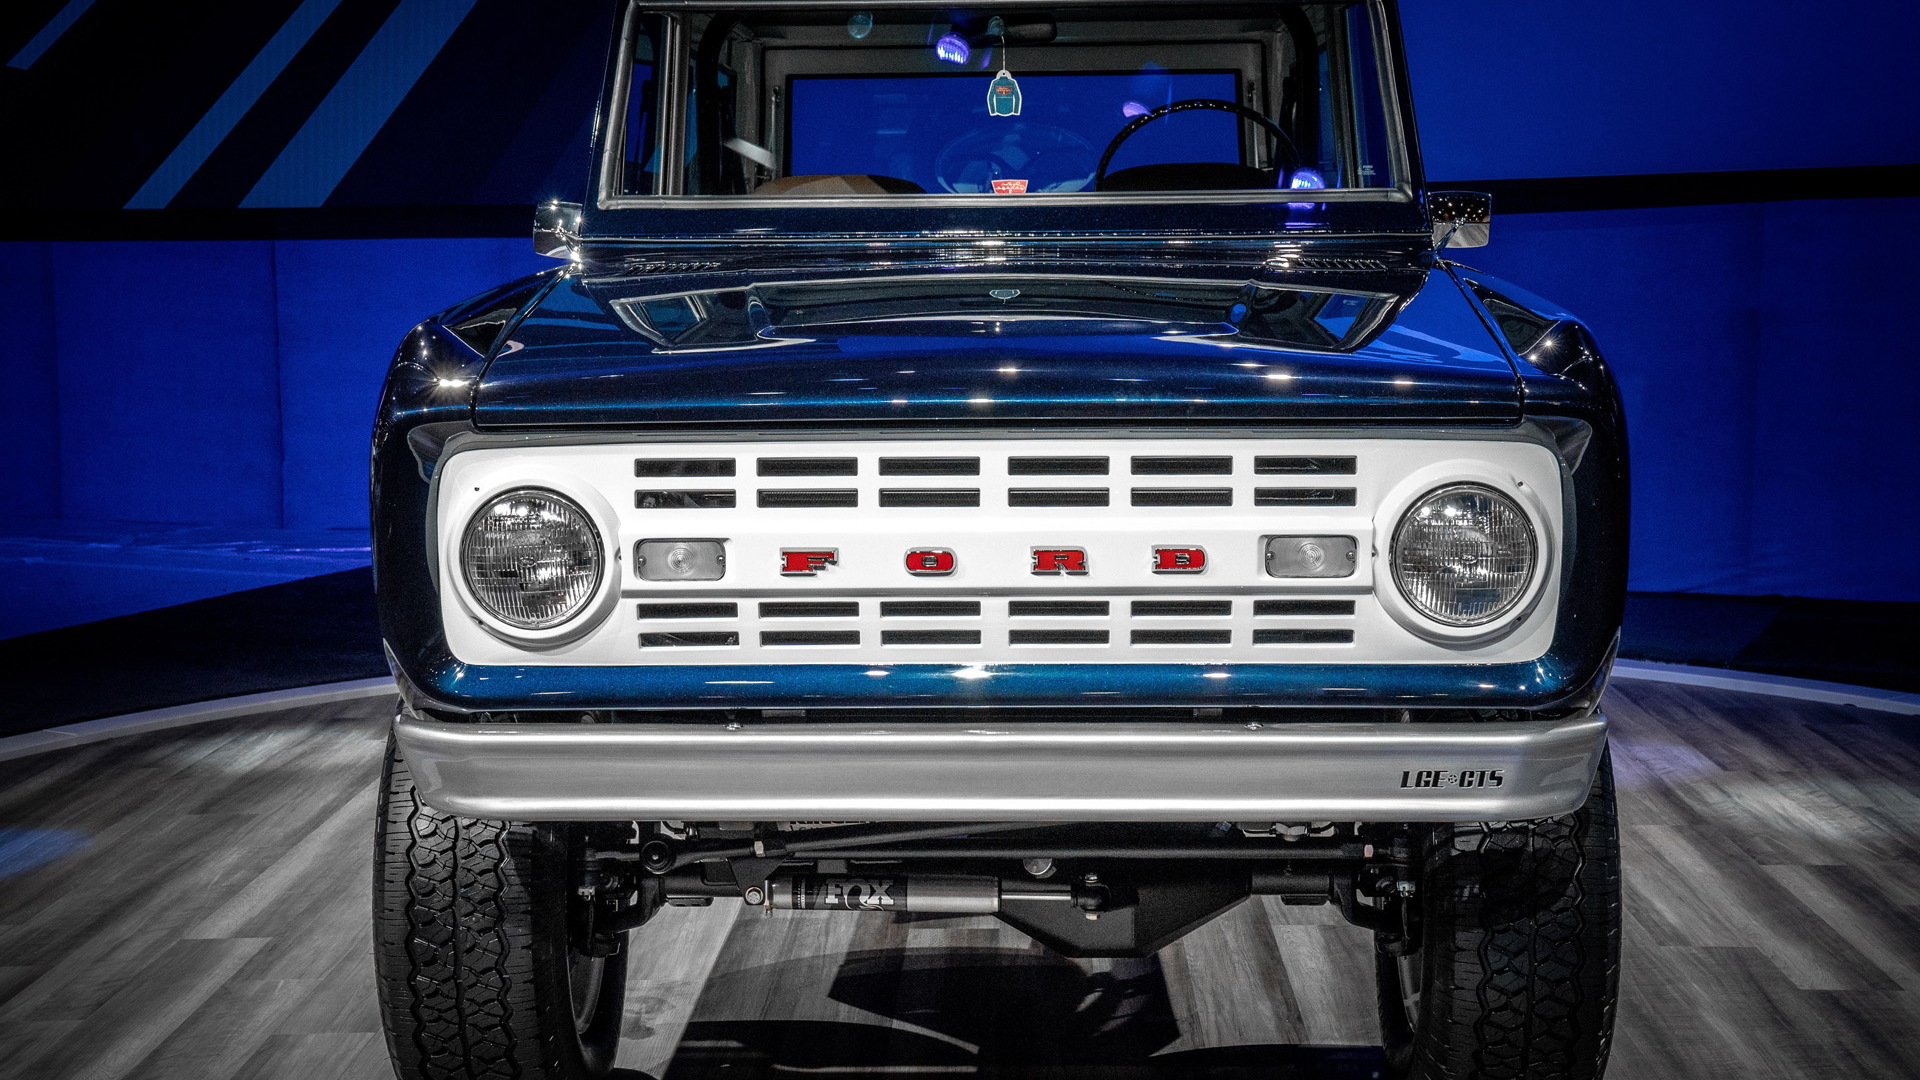 Jay Leno's 1968 Ford Bronco restored by LGE-CTS Motorsports